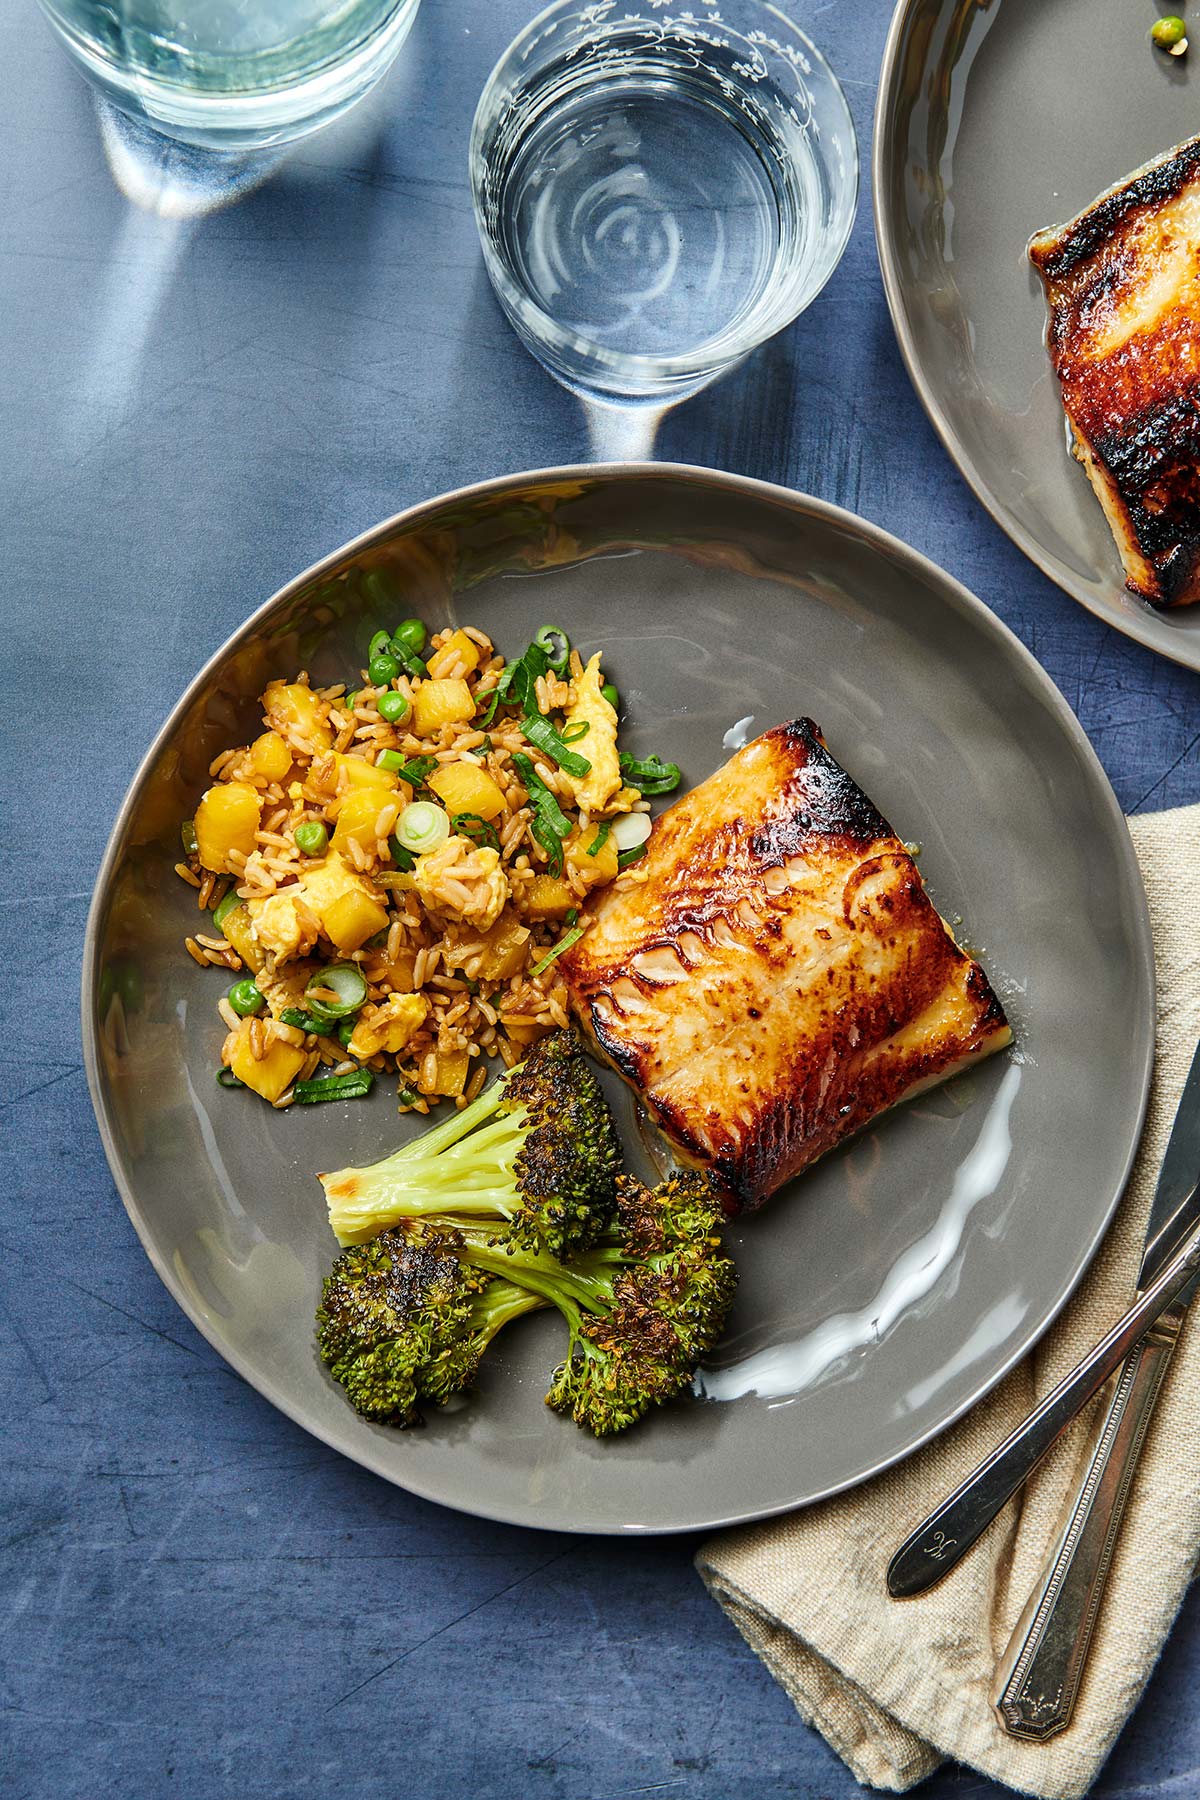 Plate on table with miso black cod, broccoli, and fried rice.